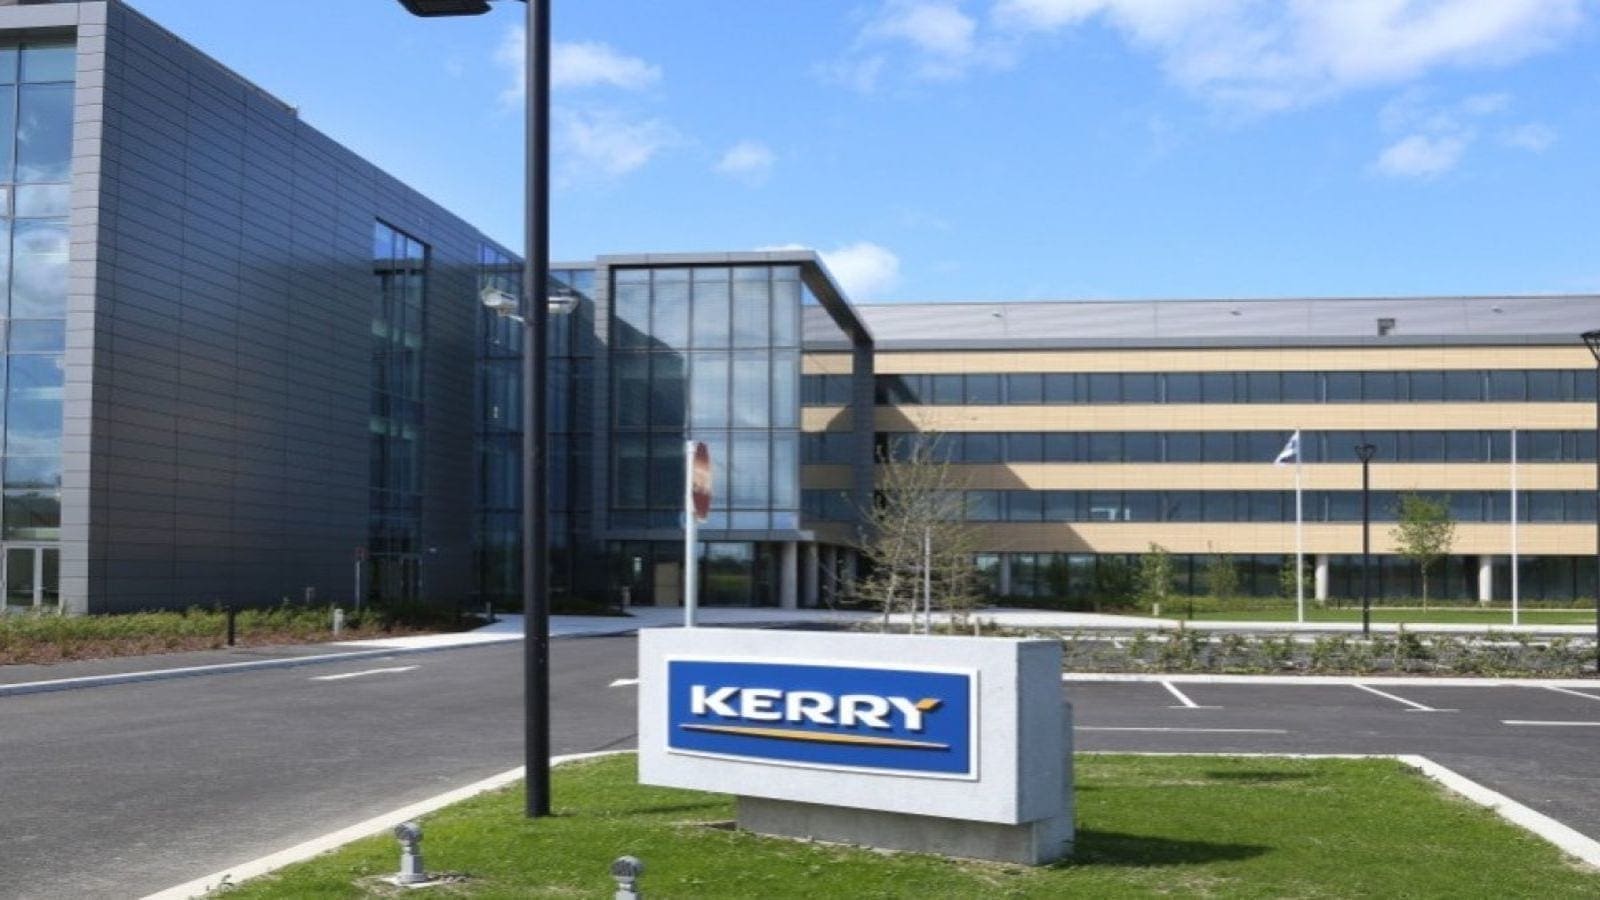 Kerry invests US$36m in Taste facility in Indonesia to bolster response to local consumer preferences